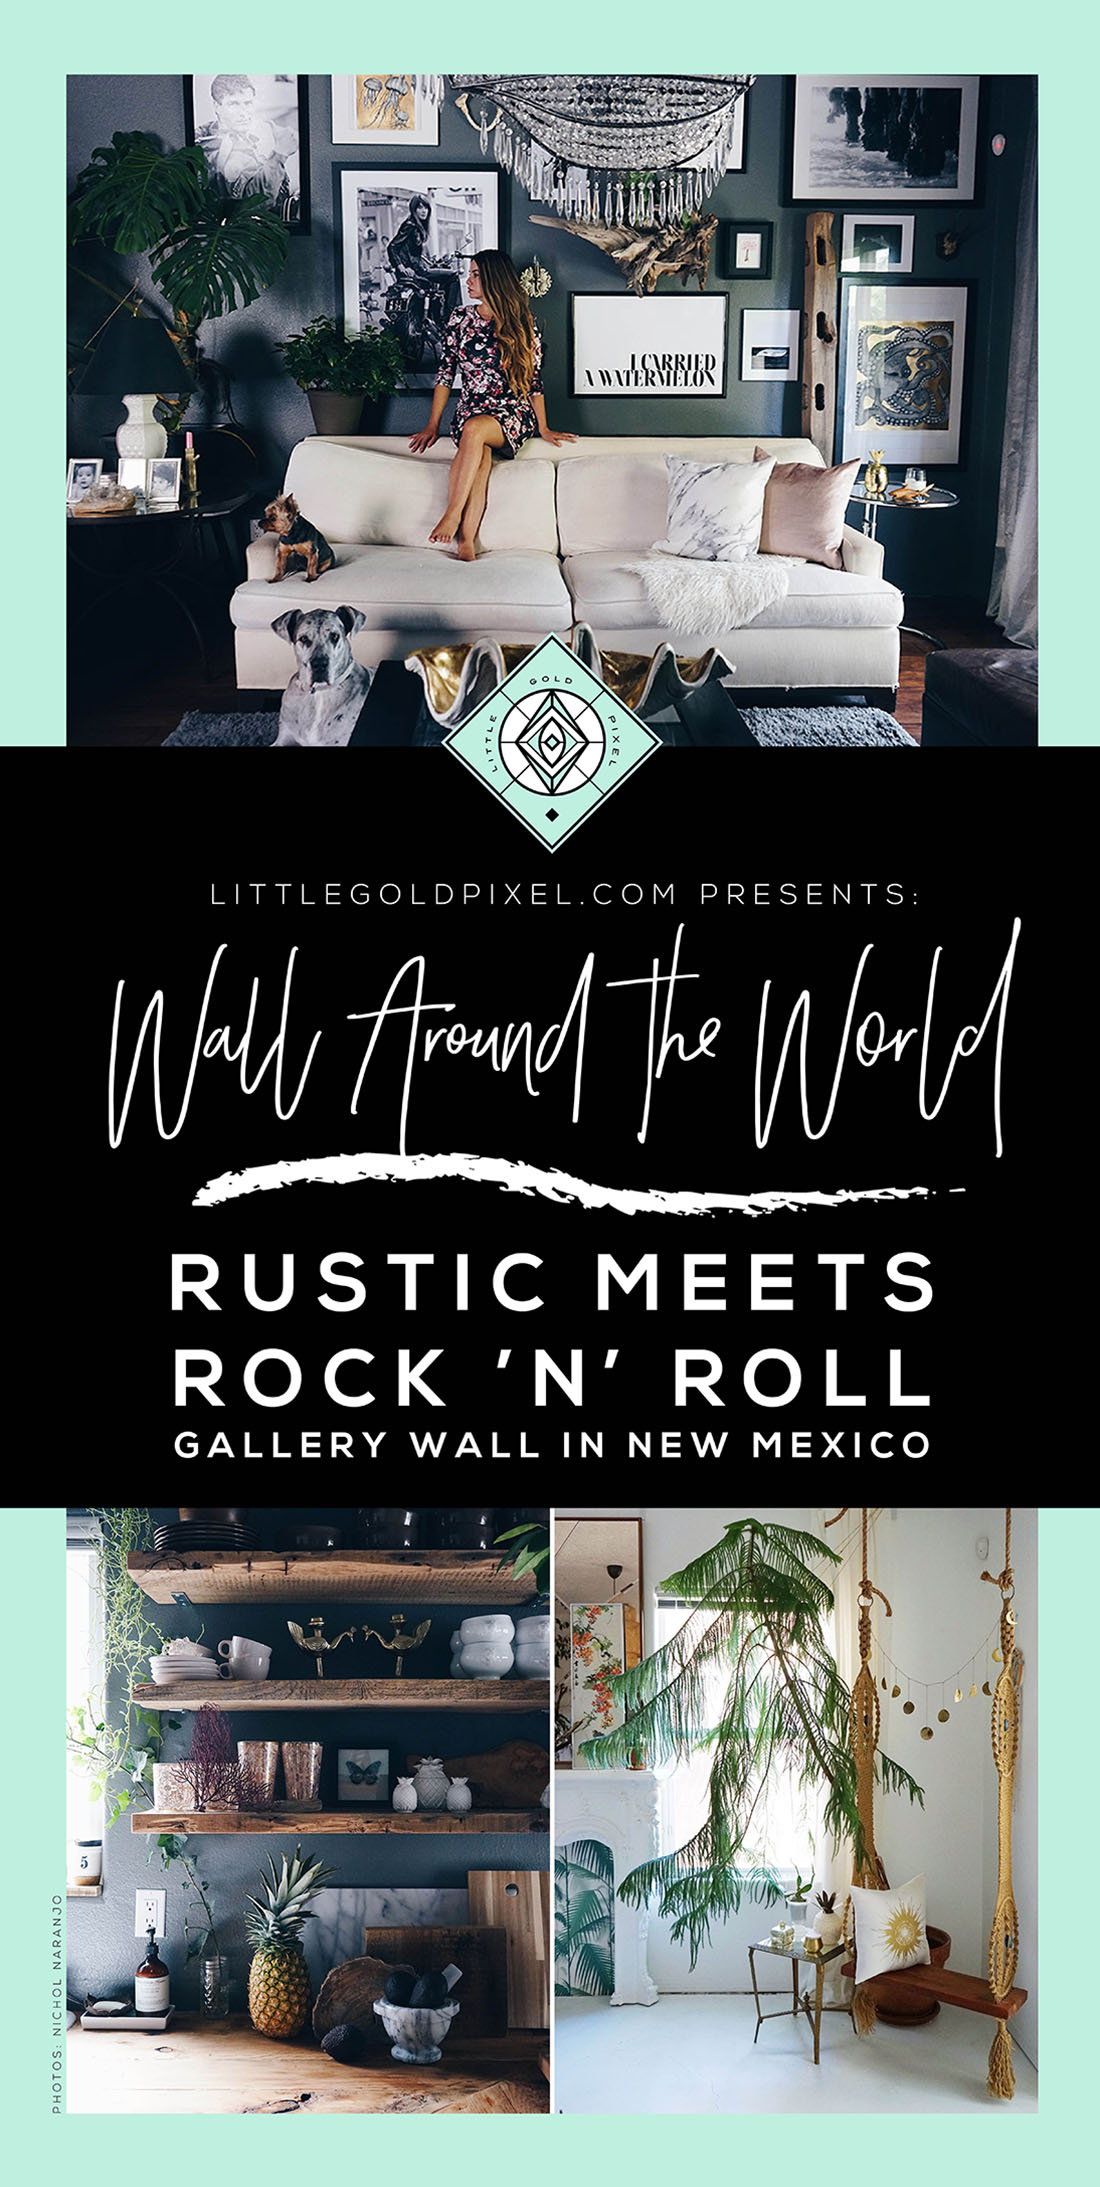 Wall Around the World: A Gallery Wall Series by Little Gold Pixel • Part 6: Rustic Meets Rock 'n' Roll Gallery Wall in New Mexico • Photos © Nichol Naranjo